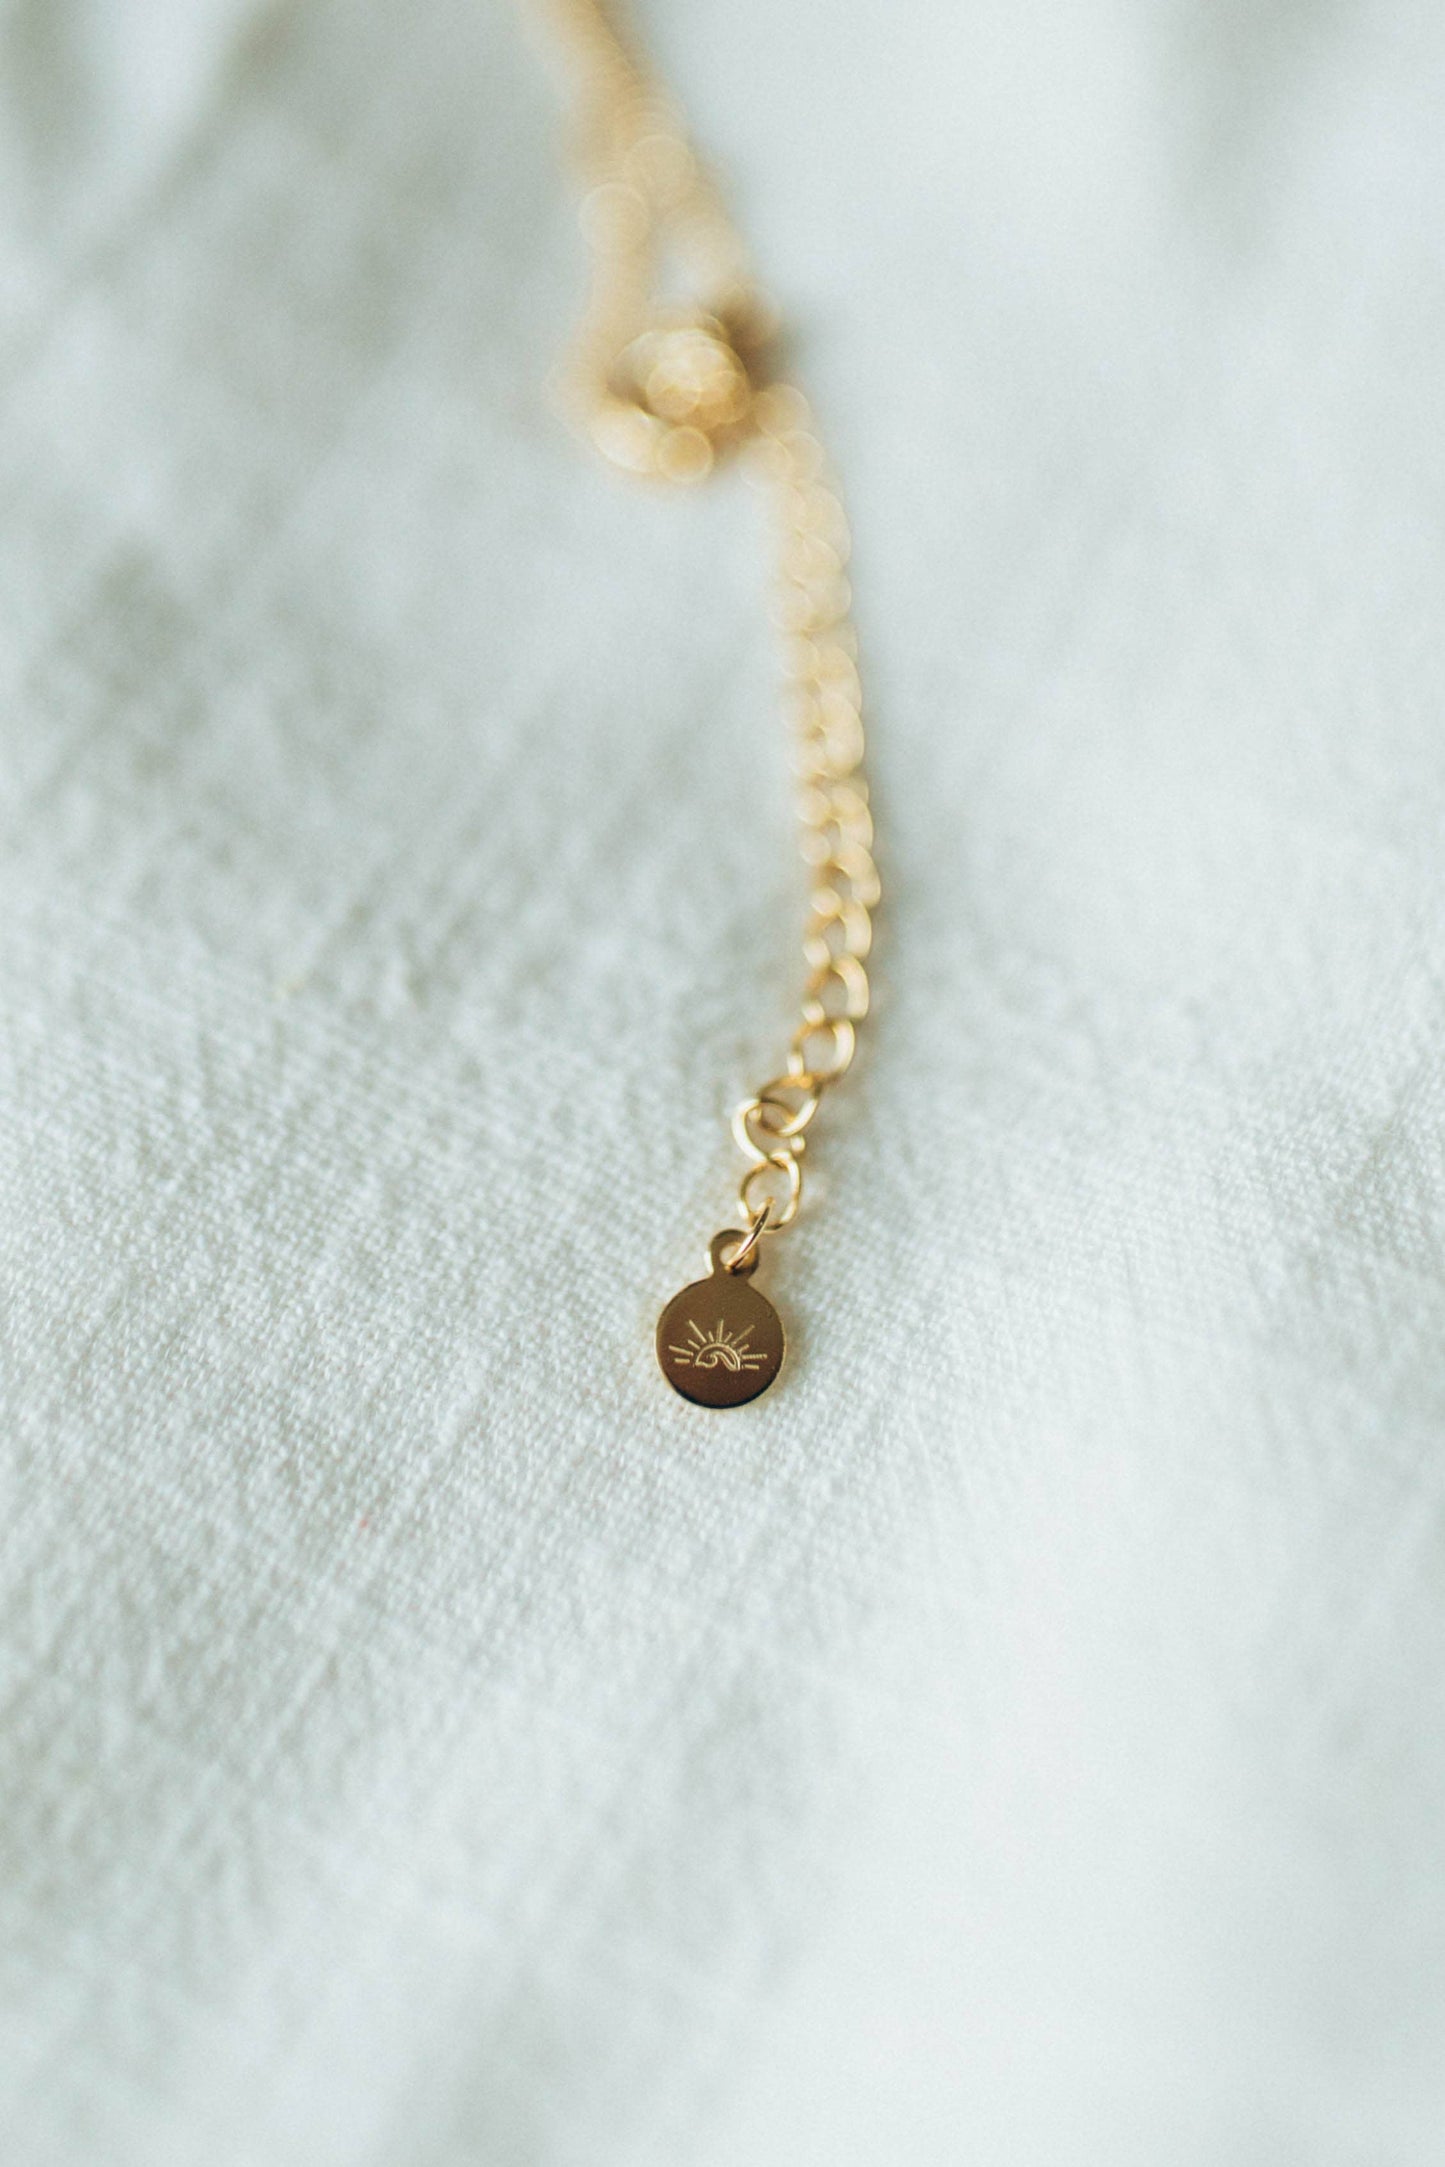 Arianna Shell Necklace: 14k Gold